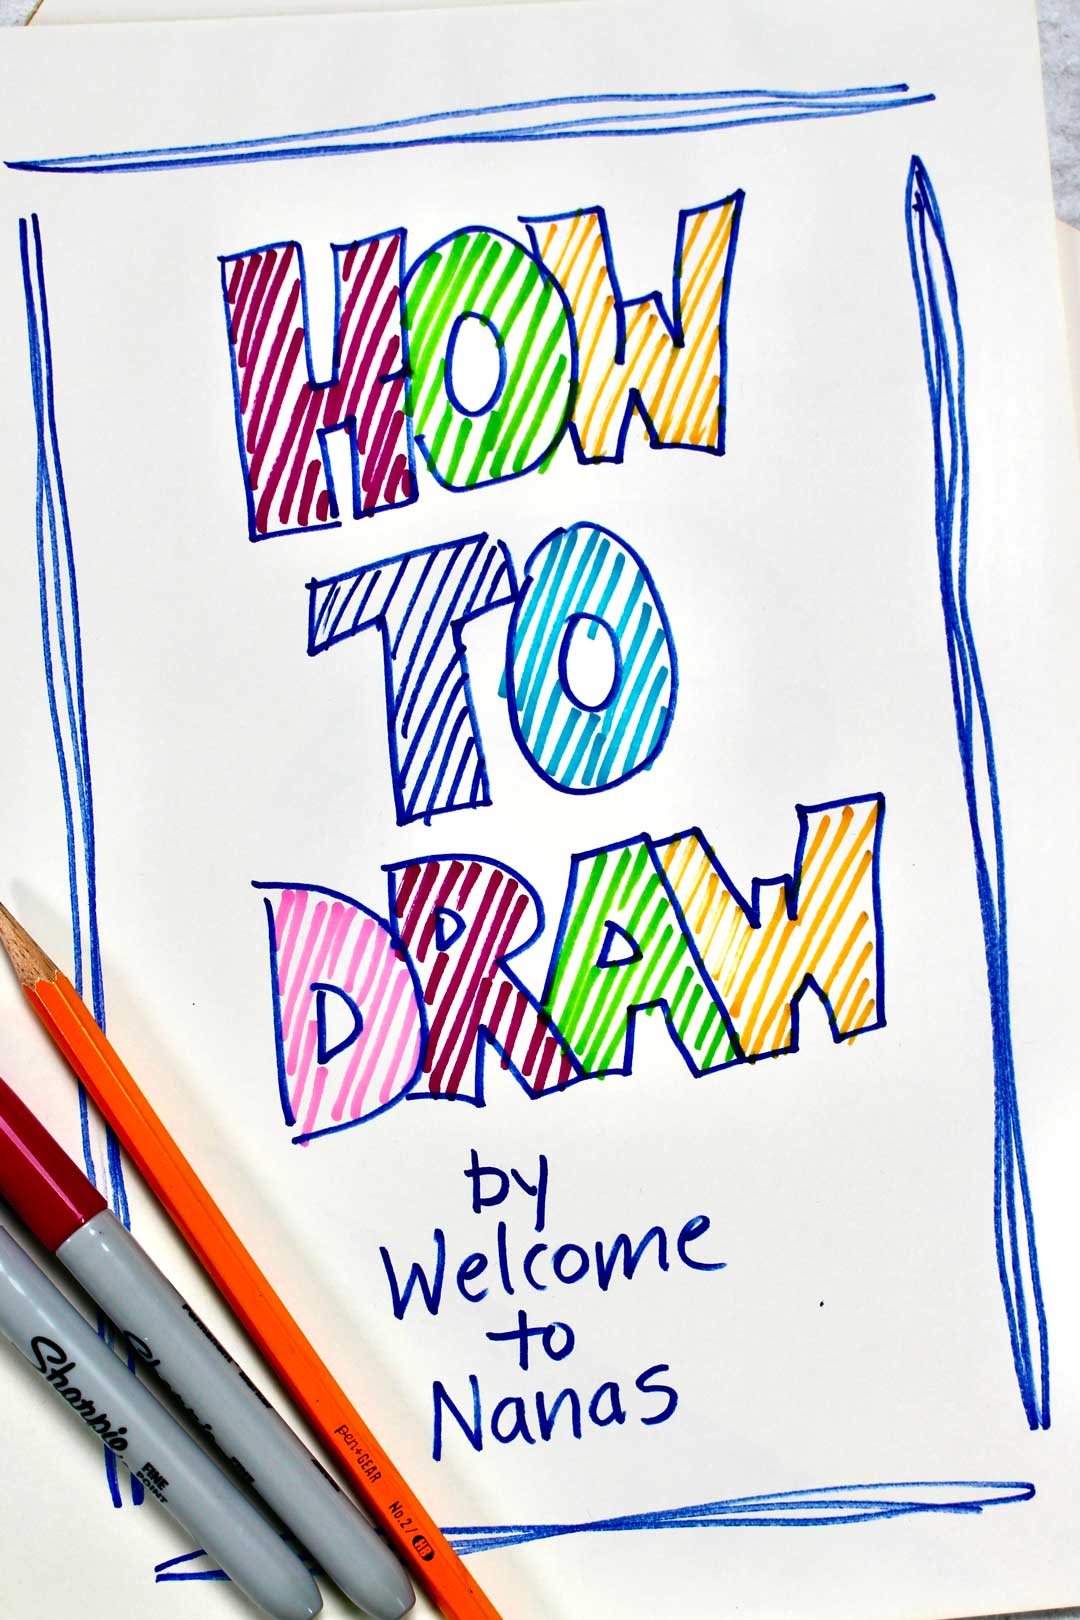 A picture that says "How to Draw", colored in with green, yellow, blue, and pink markers.